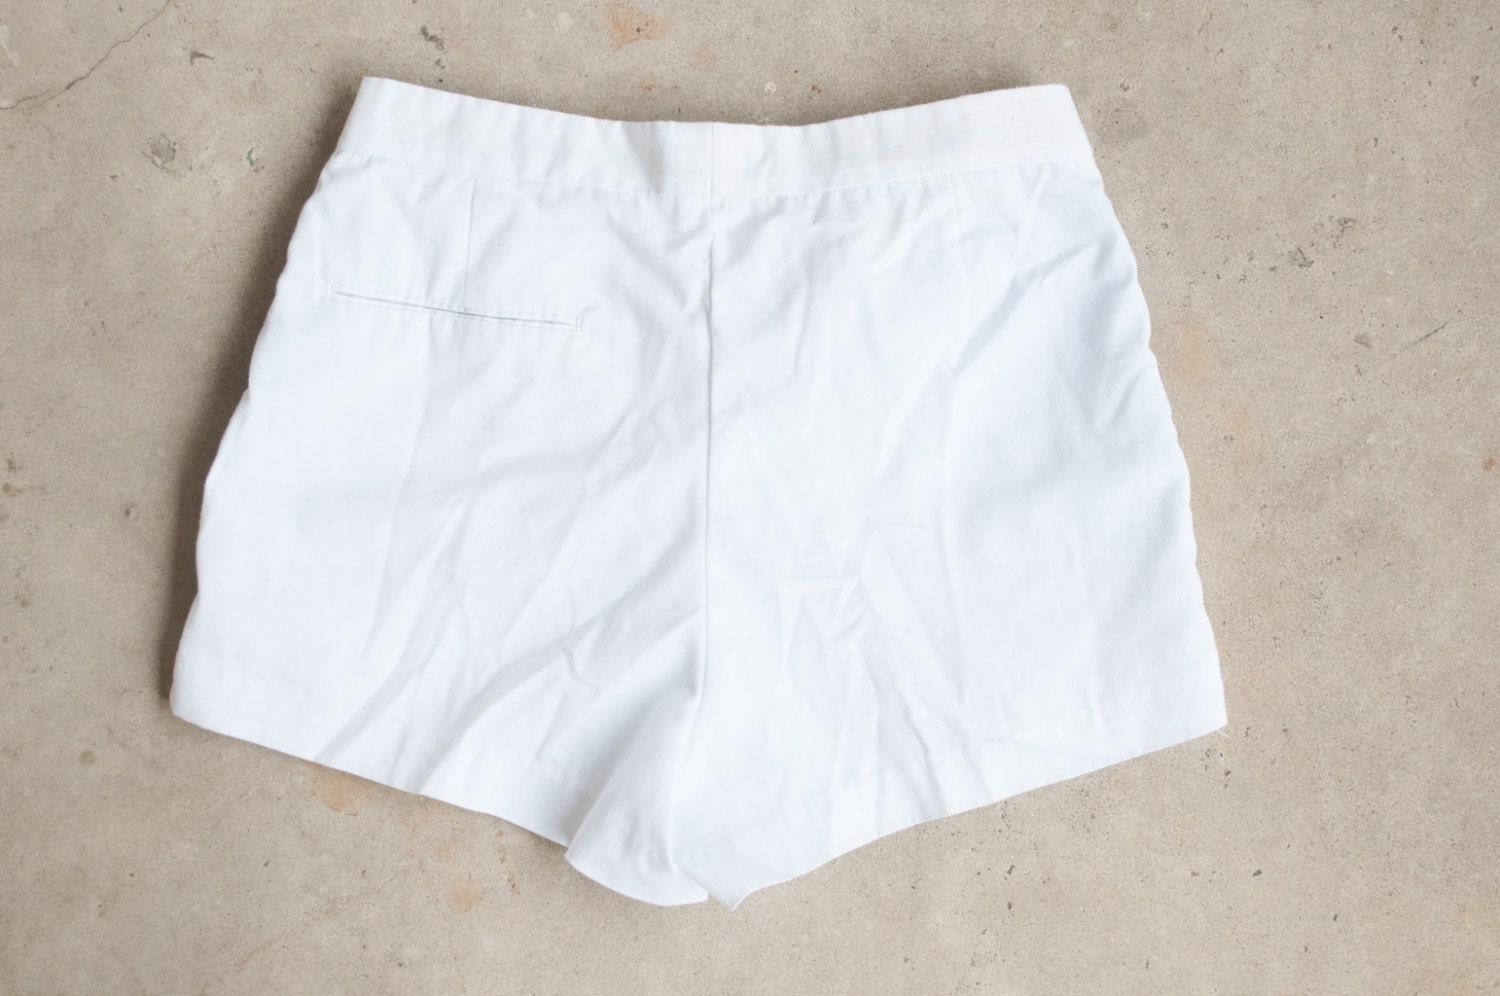 Fred Perry Tennis Shorts Mens Vintage 1970s Sportswear White